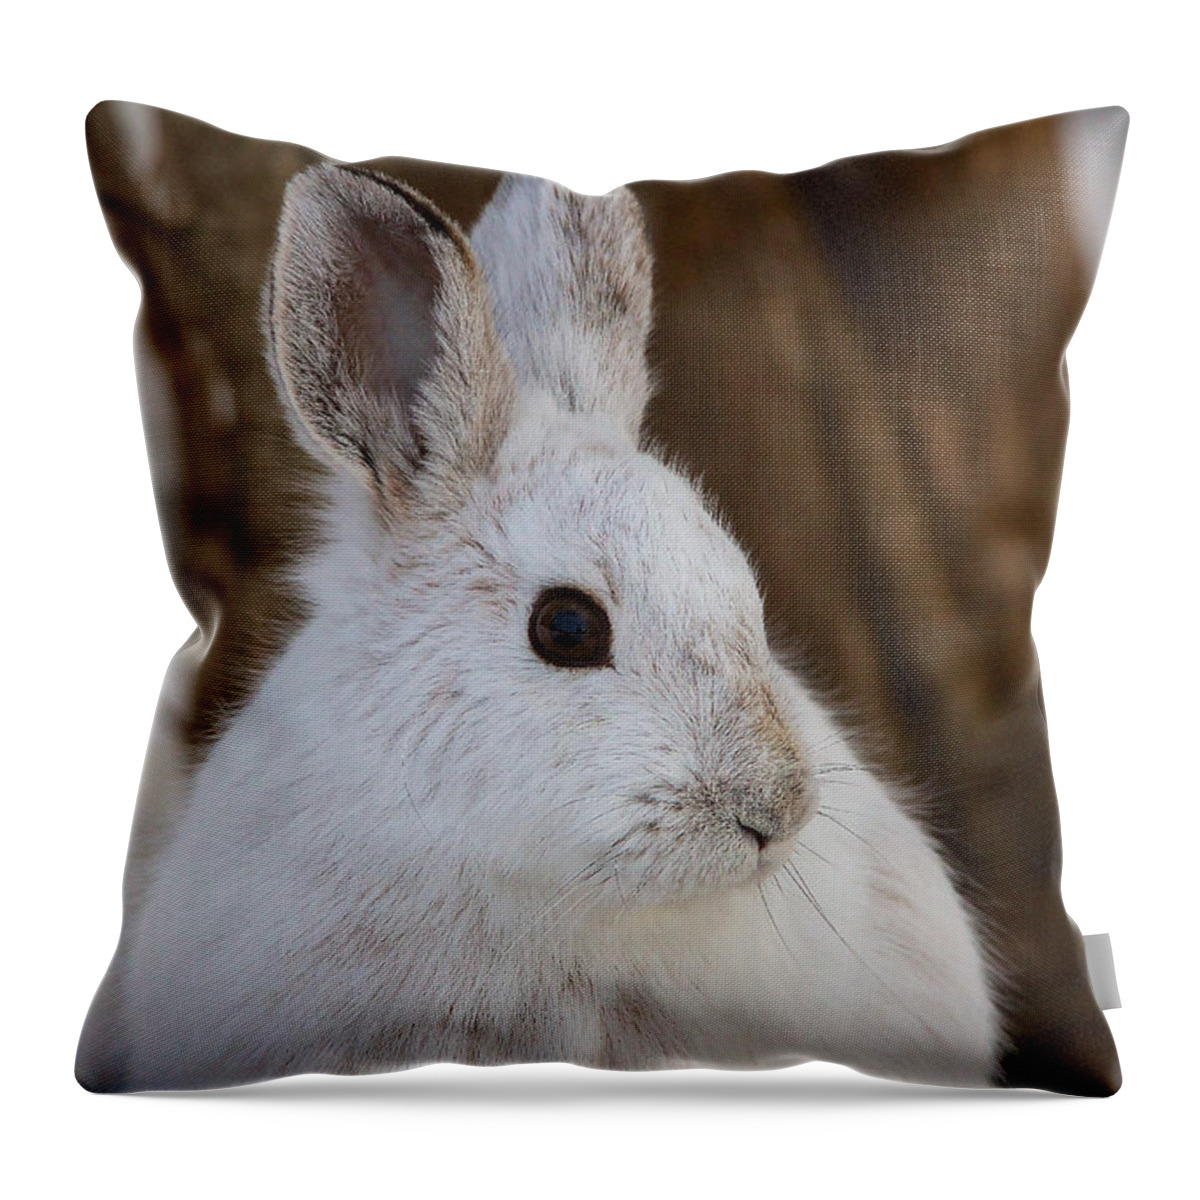 Snowshoe Hare Throw Pillow featuring the photograph Snowshoe Hare by Nature and Wildlife Photography